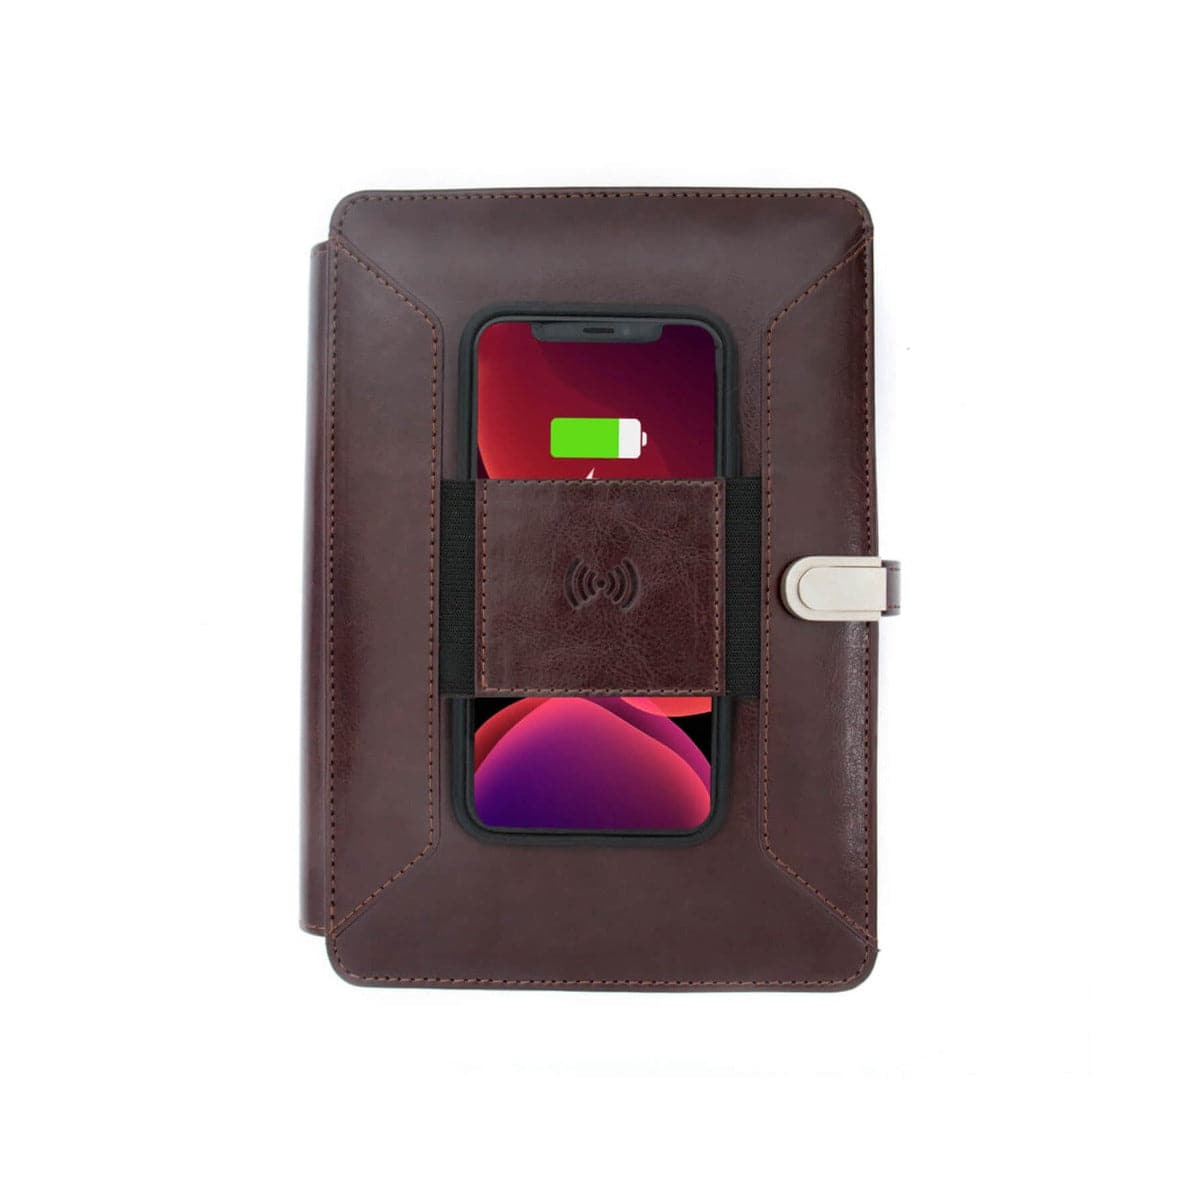 LAPIS BARD Pennline Superbook Organizer With Wireless Charging + 8000mAh Powerbank And 16GB Flash Drive – Coffee Brown WP26785 - Kamal Watch Company